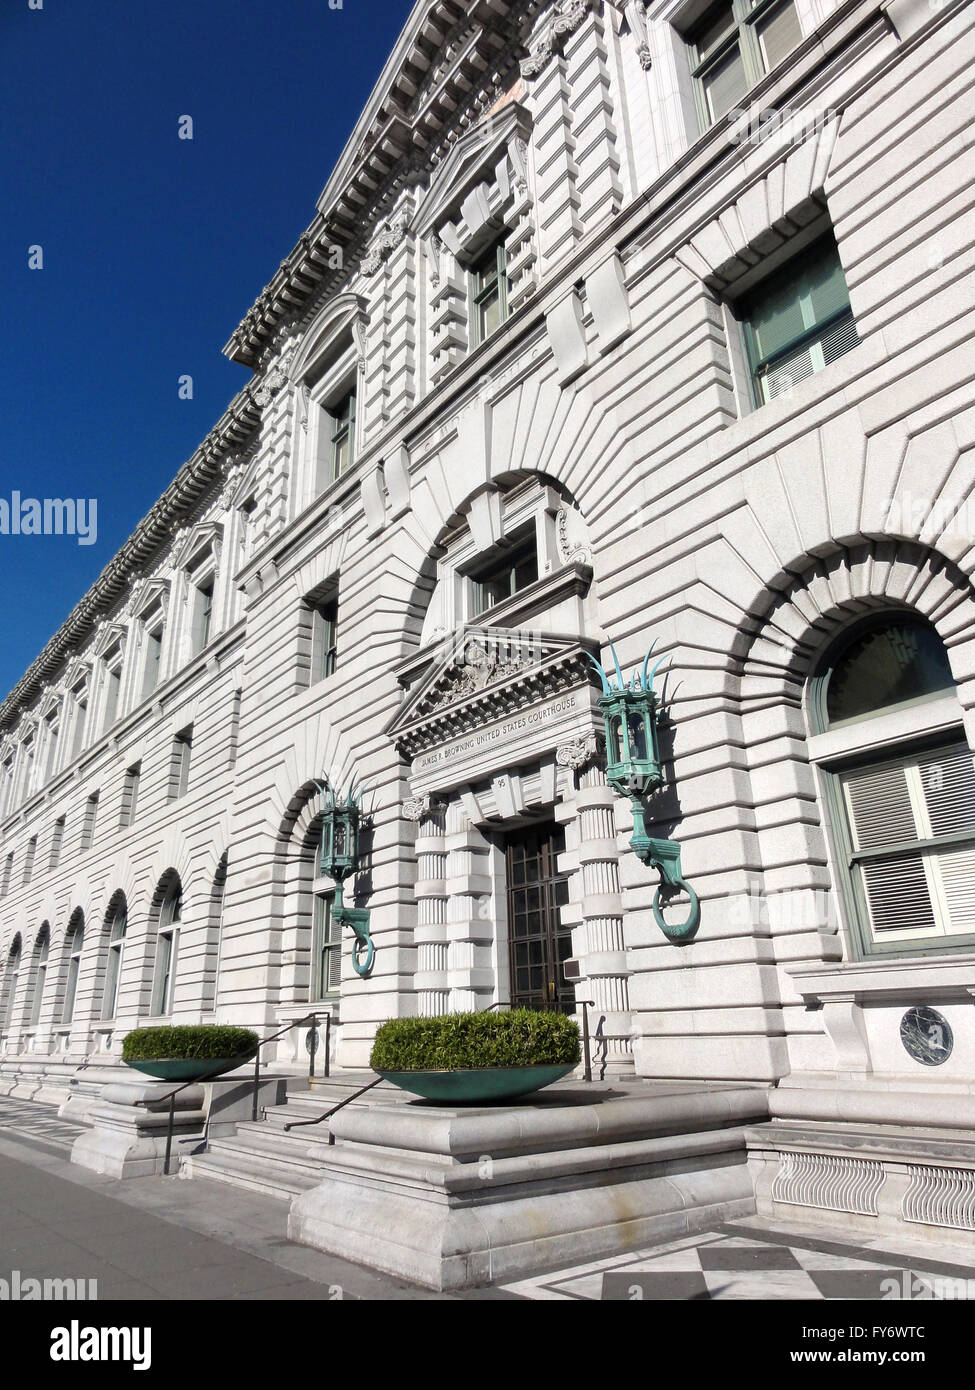 United States Court of Appeals, Ninth Circuit.  Headquartered in San Francisco, California, the Ninth Circuit is by far the larg Stock Photo